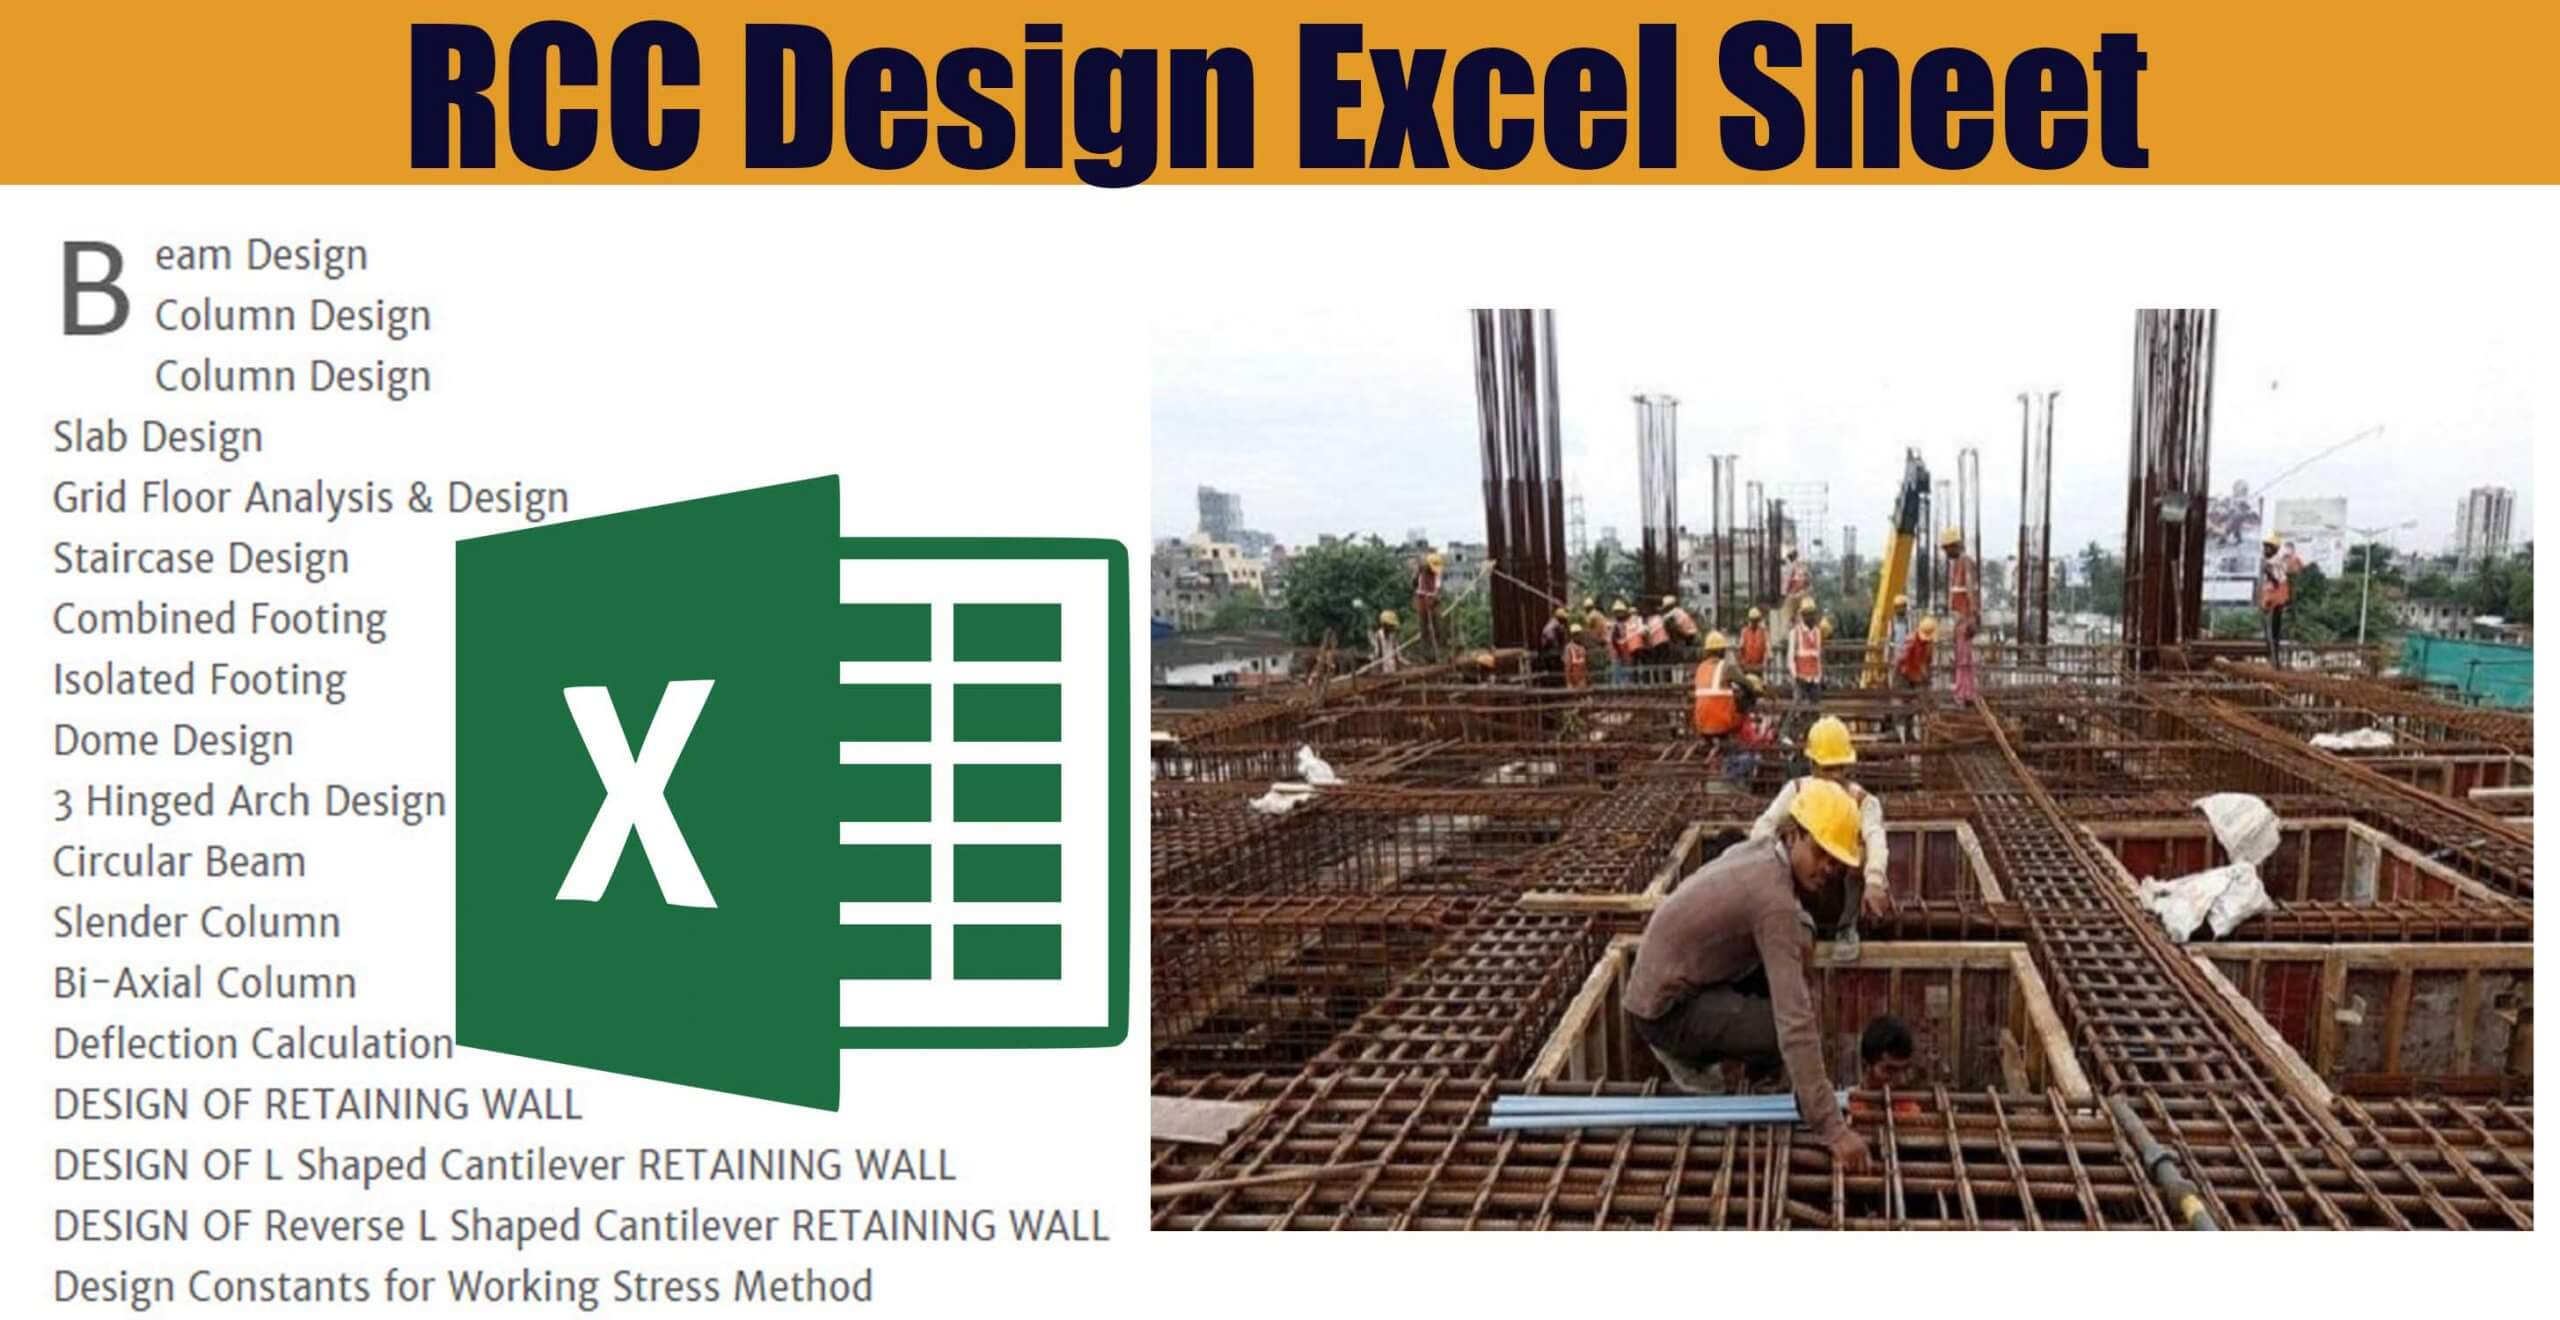 RCC Design Excel Sheet - Engineering Discoveries